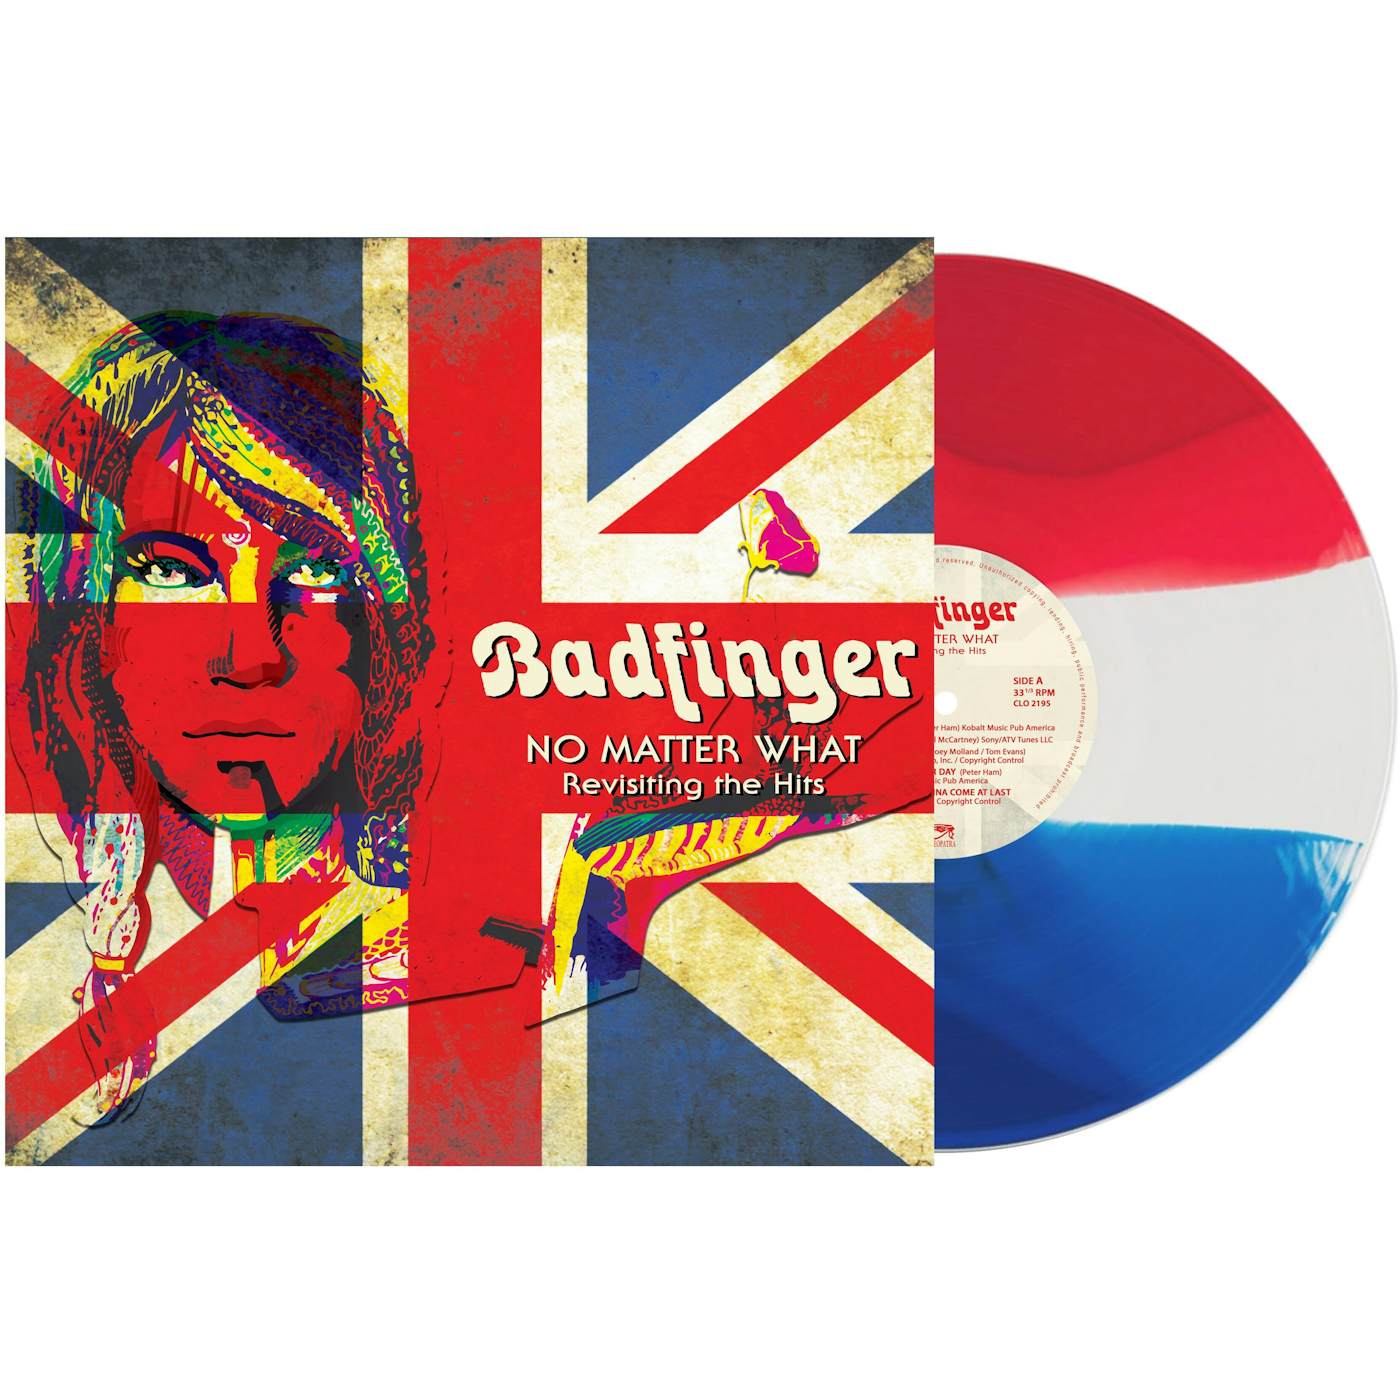 Badfinger NO MATTER WHAT - REVISITING THE HITS (TRI-COLOR VINYL) Vinyl Record